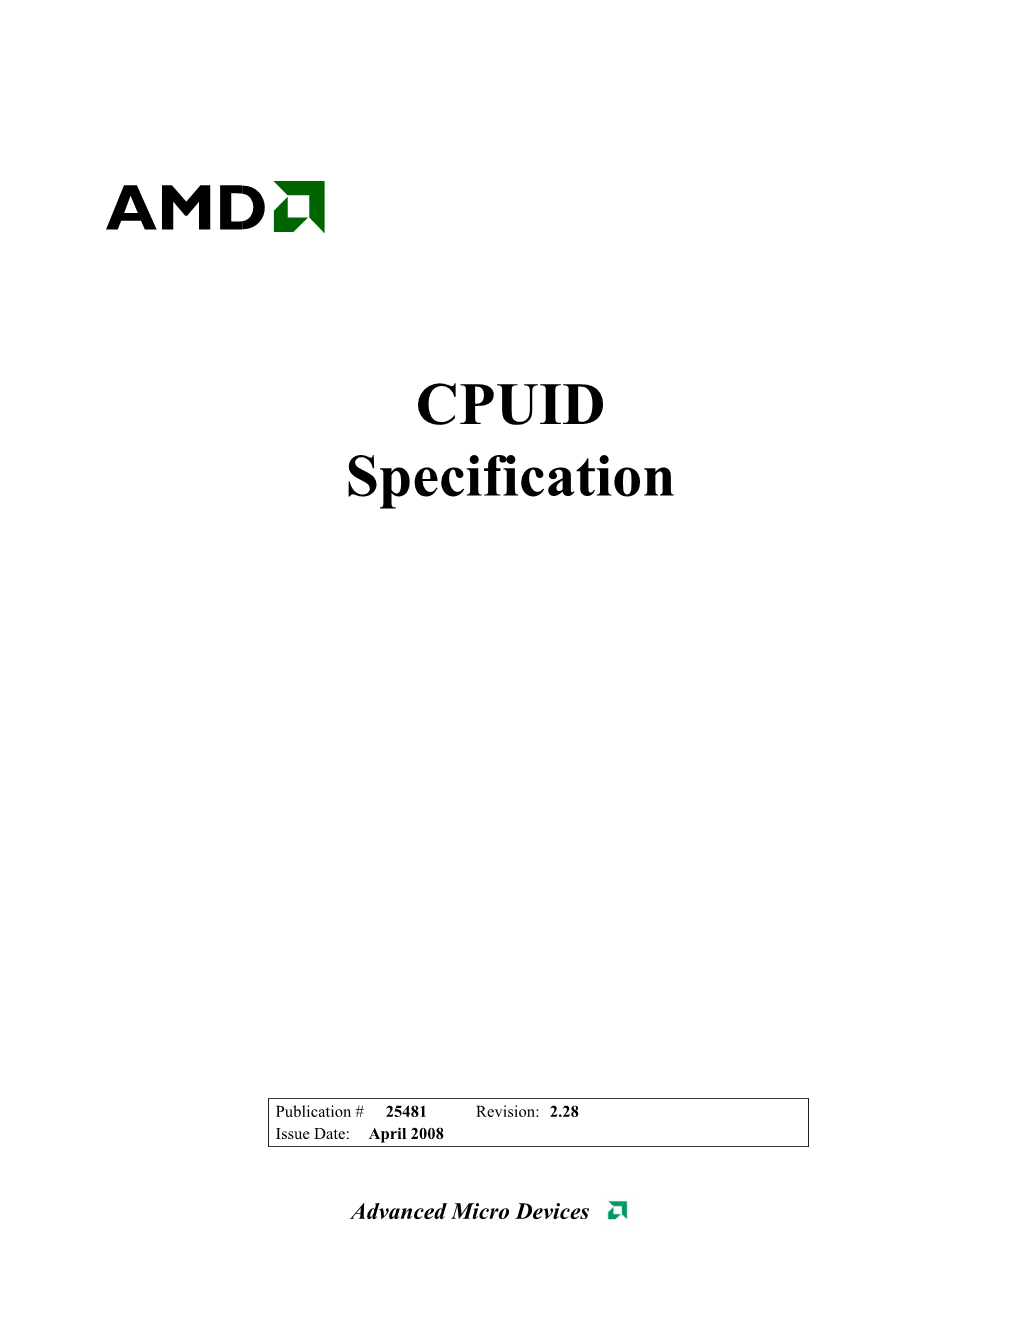 CPUID Specification